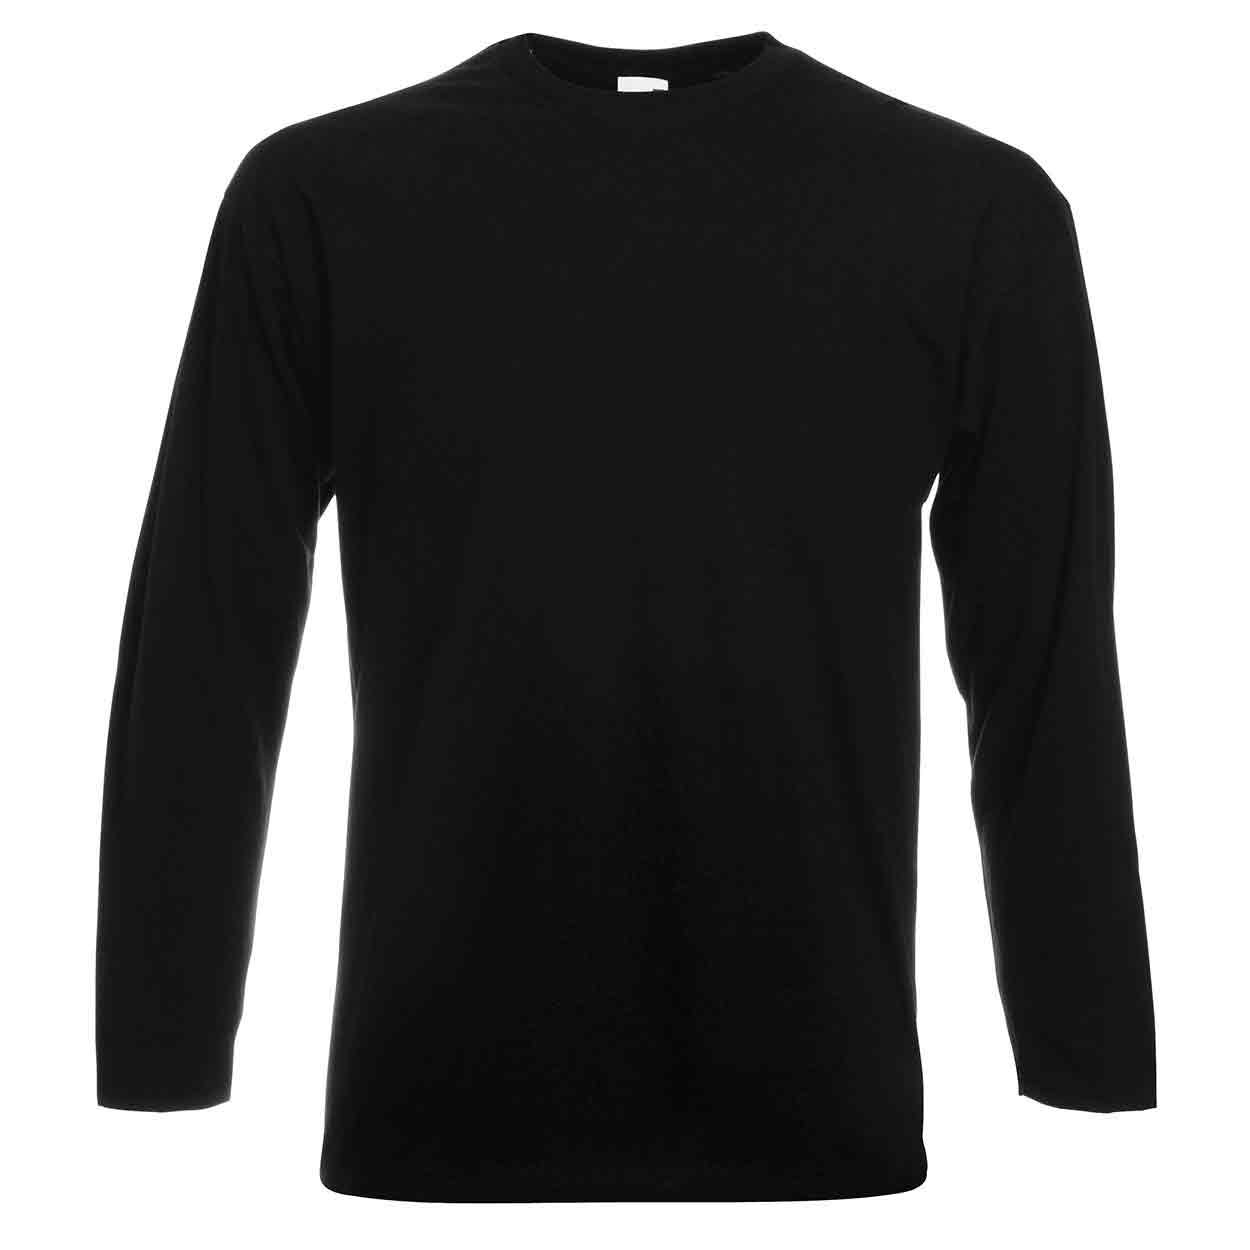 Fruit of the Loom SS21 Long Sleeve Value T-Shirt - Mens Long Sleeve T-Shirts  - Unisex / Men's T Shirt Alternatives - Unisex / Men's T Shirts - T Shirts  - Leisurewear - Best Workwear